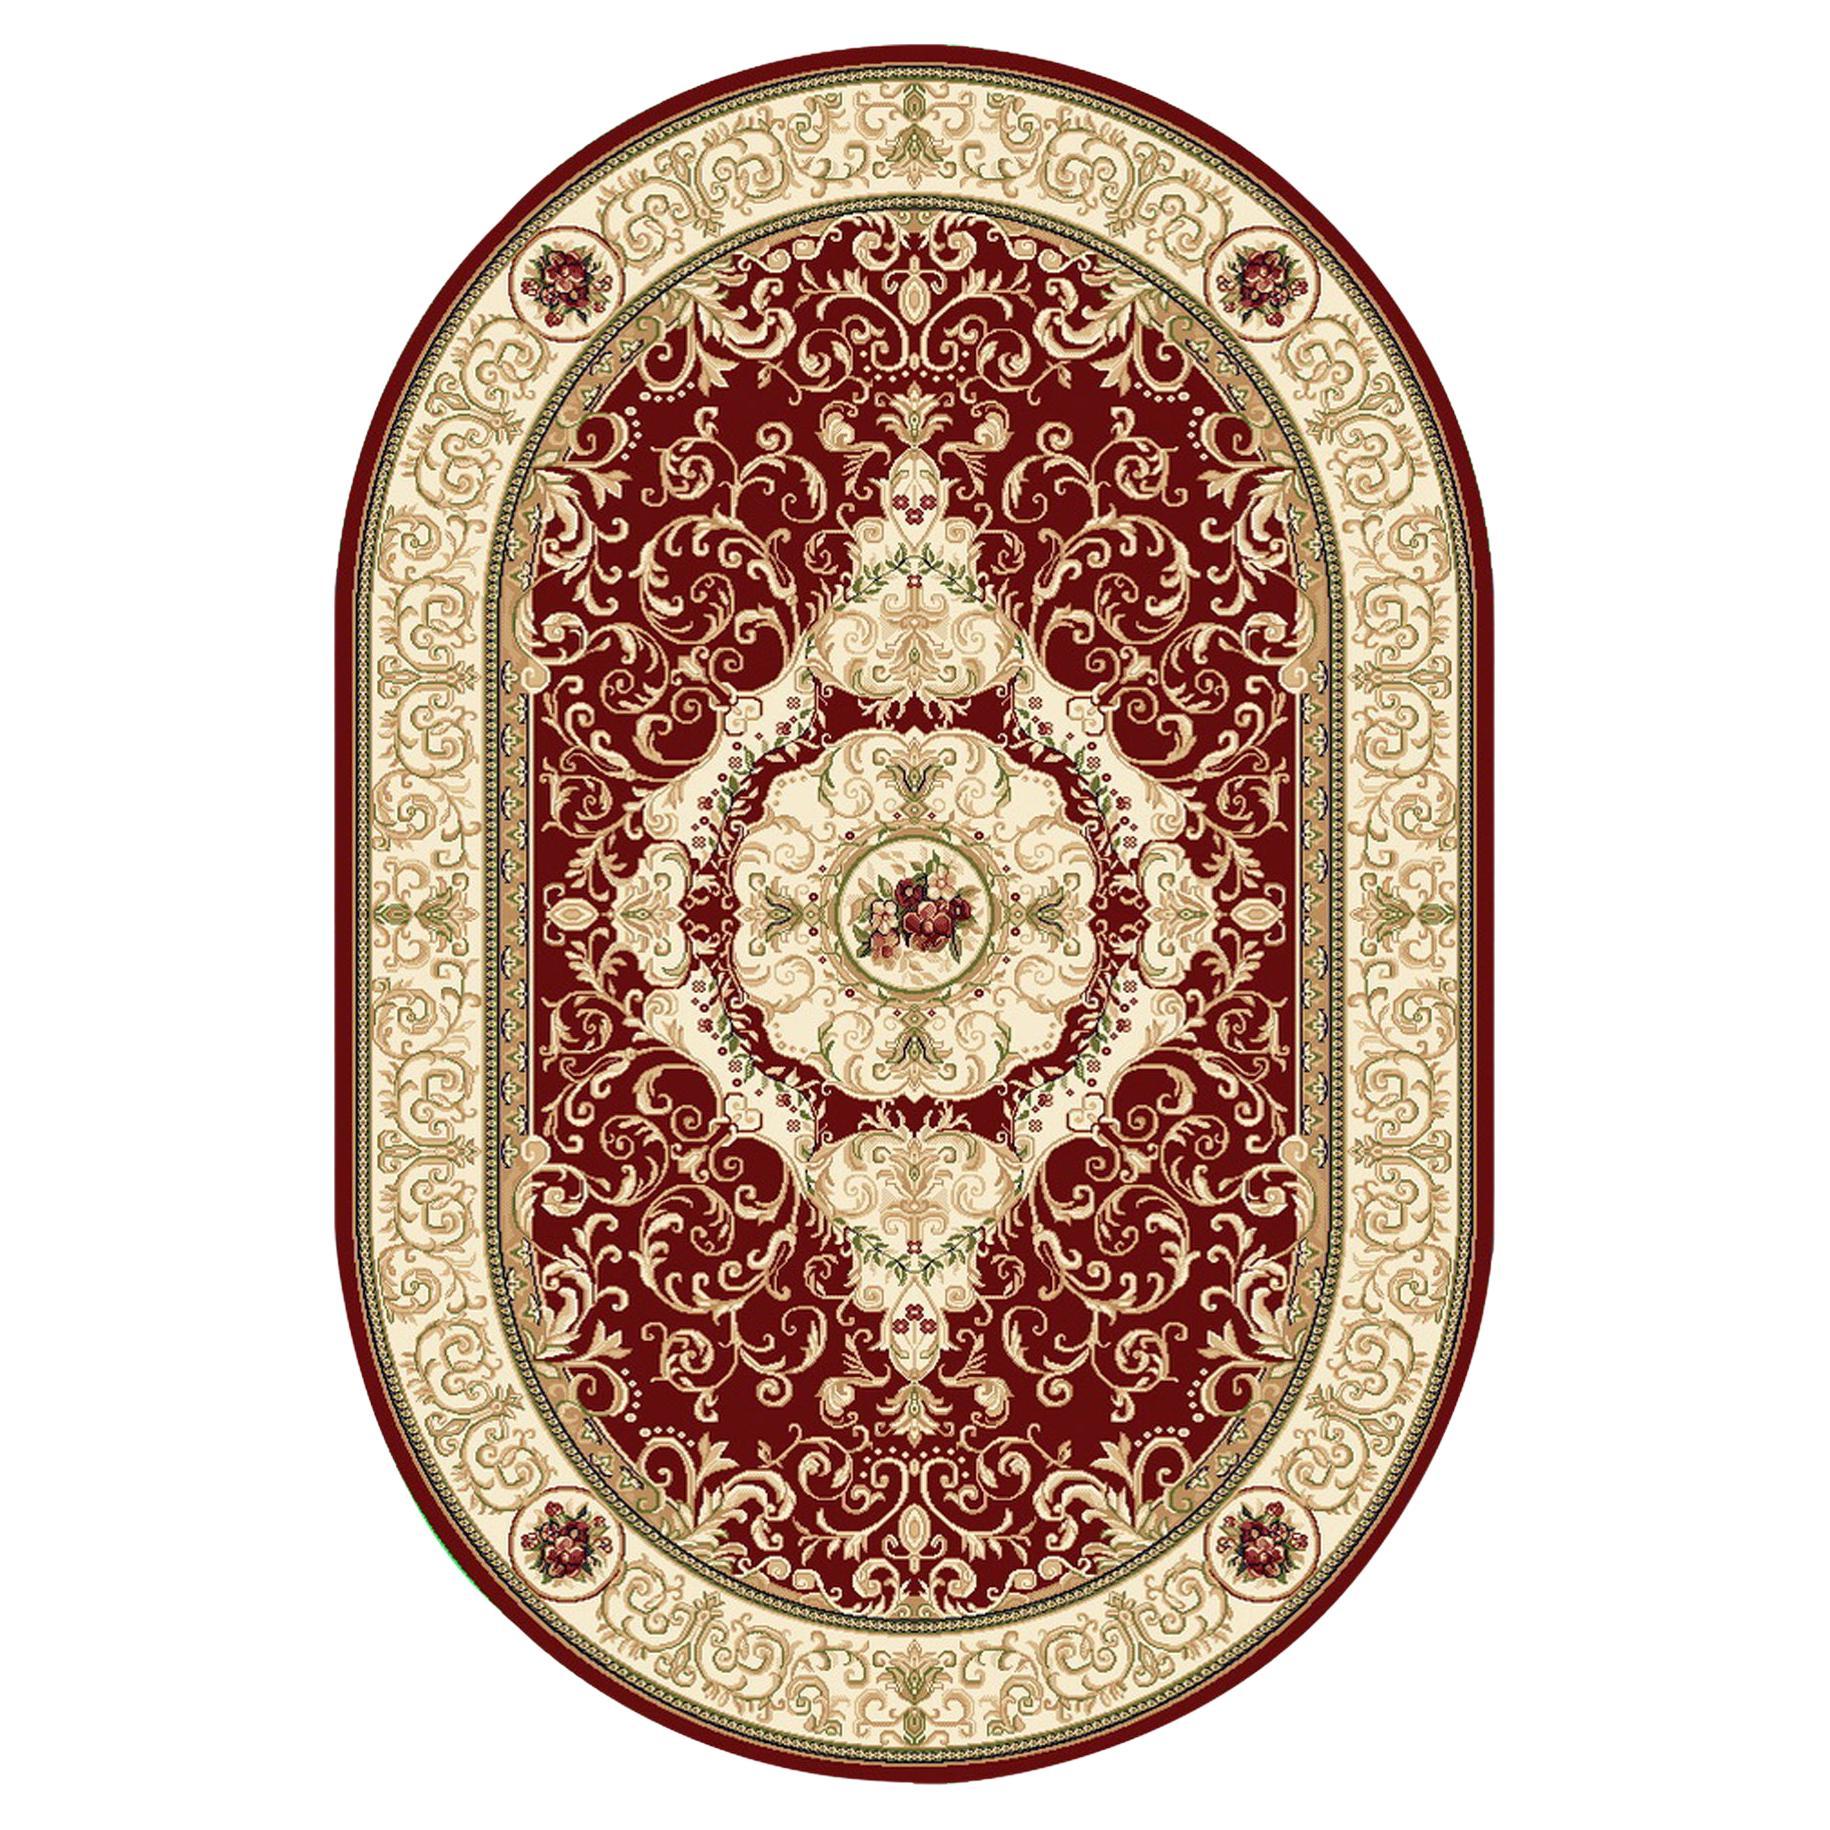 21st Century Handknotted Oval Bamboo Silk Rug by Modenese Interiors, Scarlet